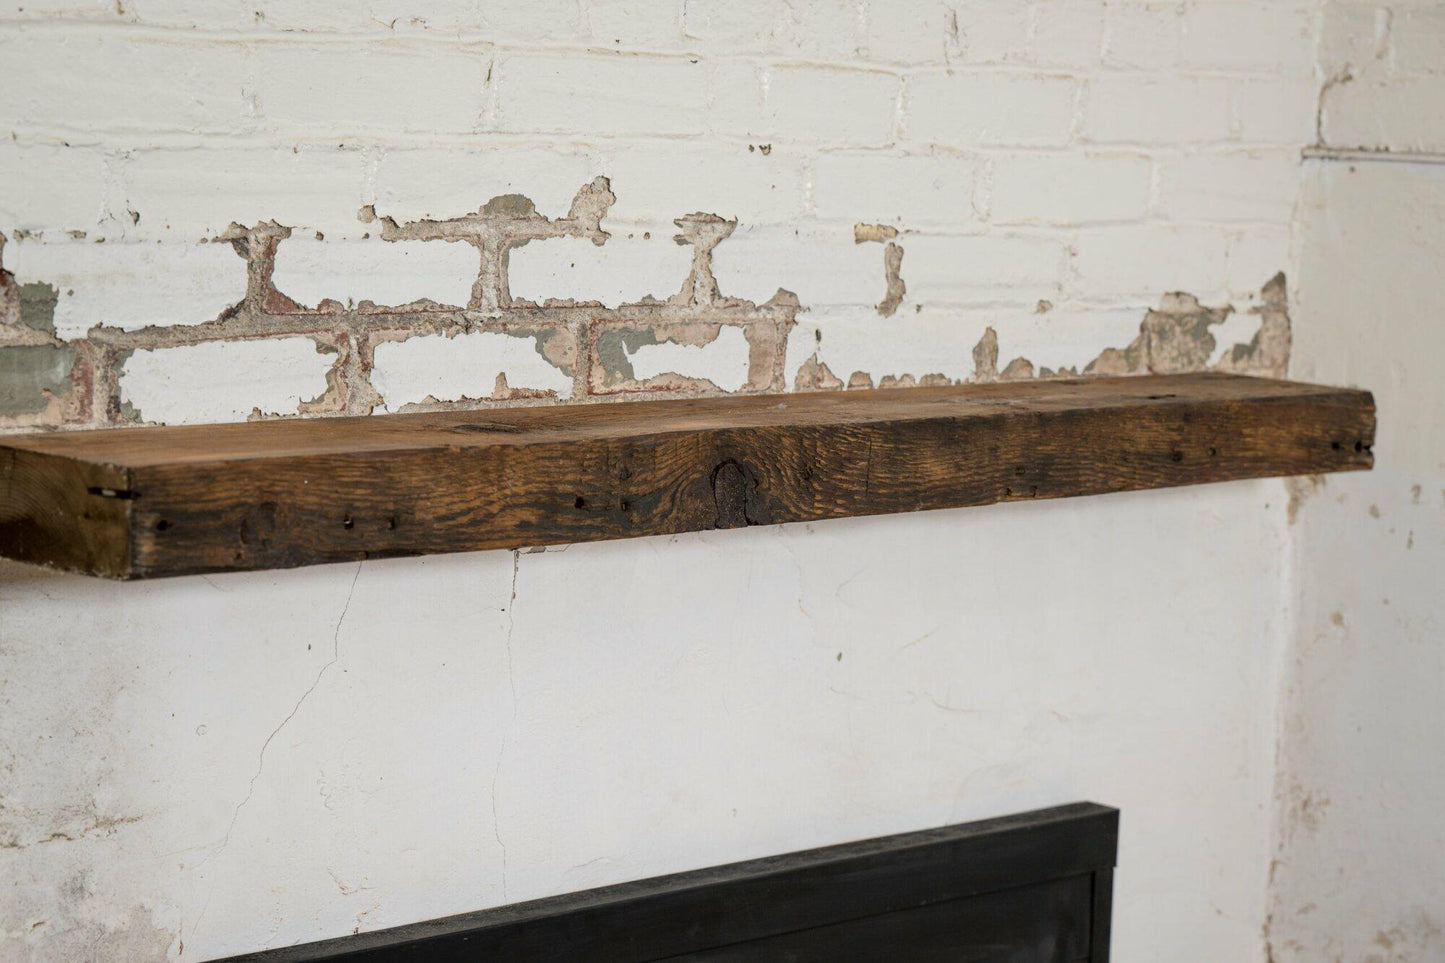 reclaimed barnwood floating fireplace mantel in an oil finish. Displayed on a brick and concrete fireplace with knots, nail holes, and grain patterns present.